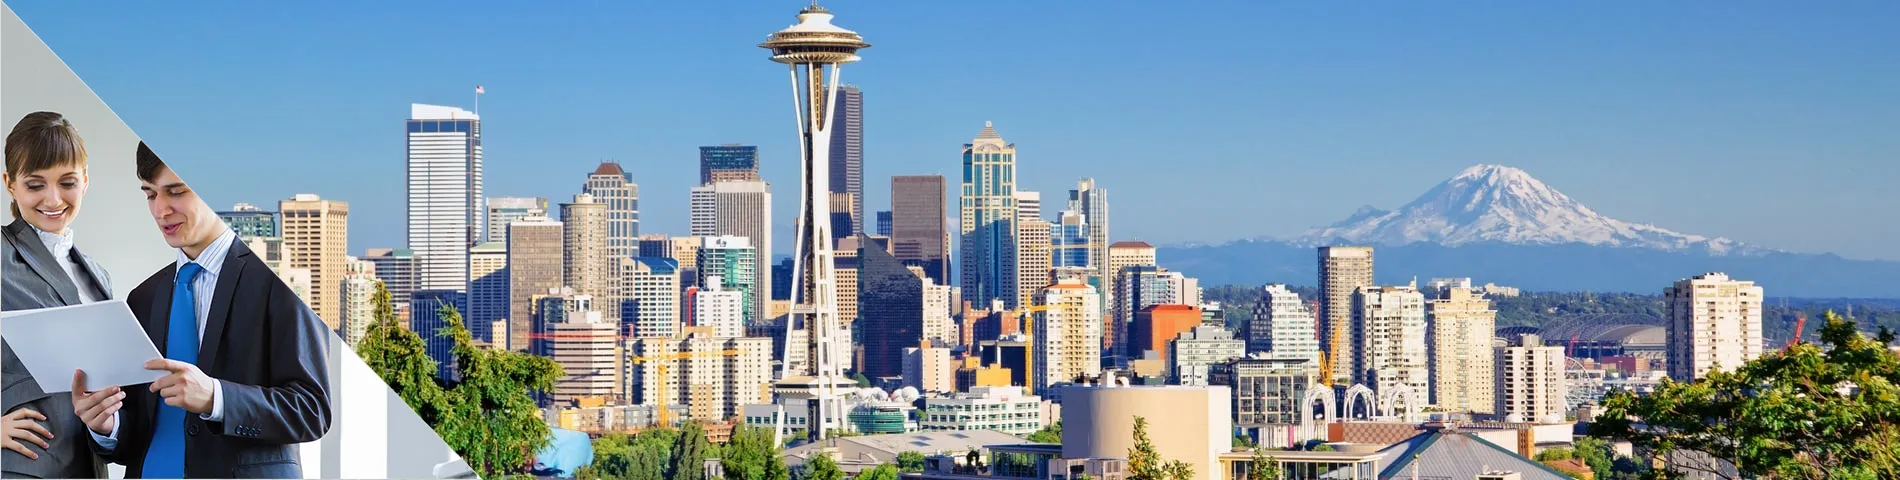 Seattle - Business Individuale